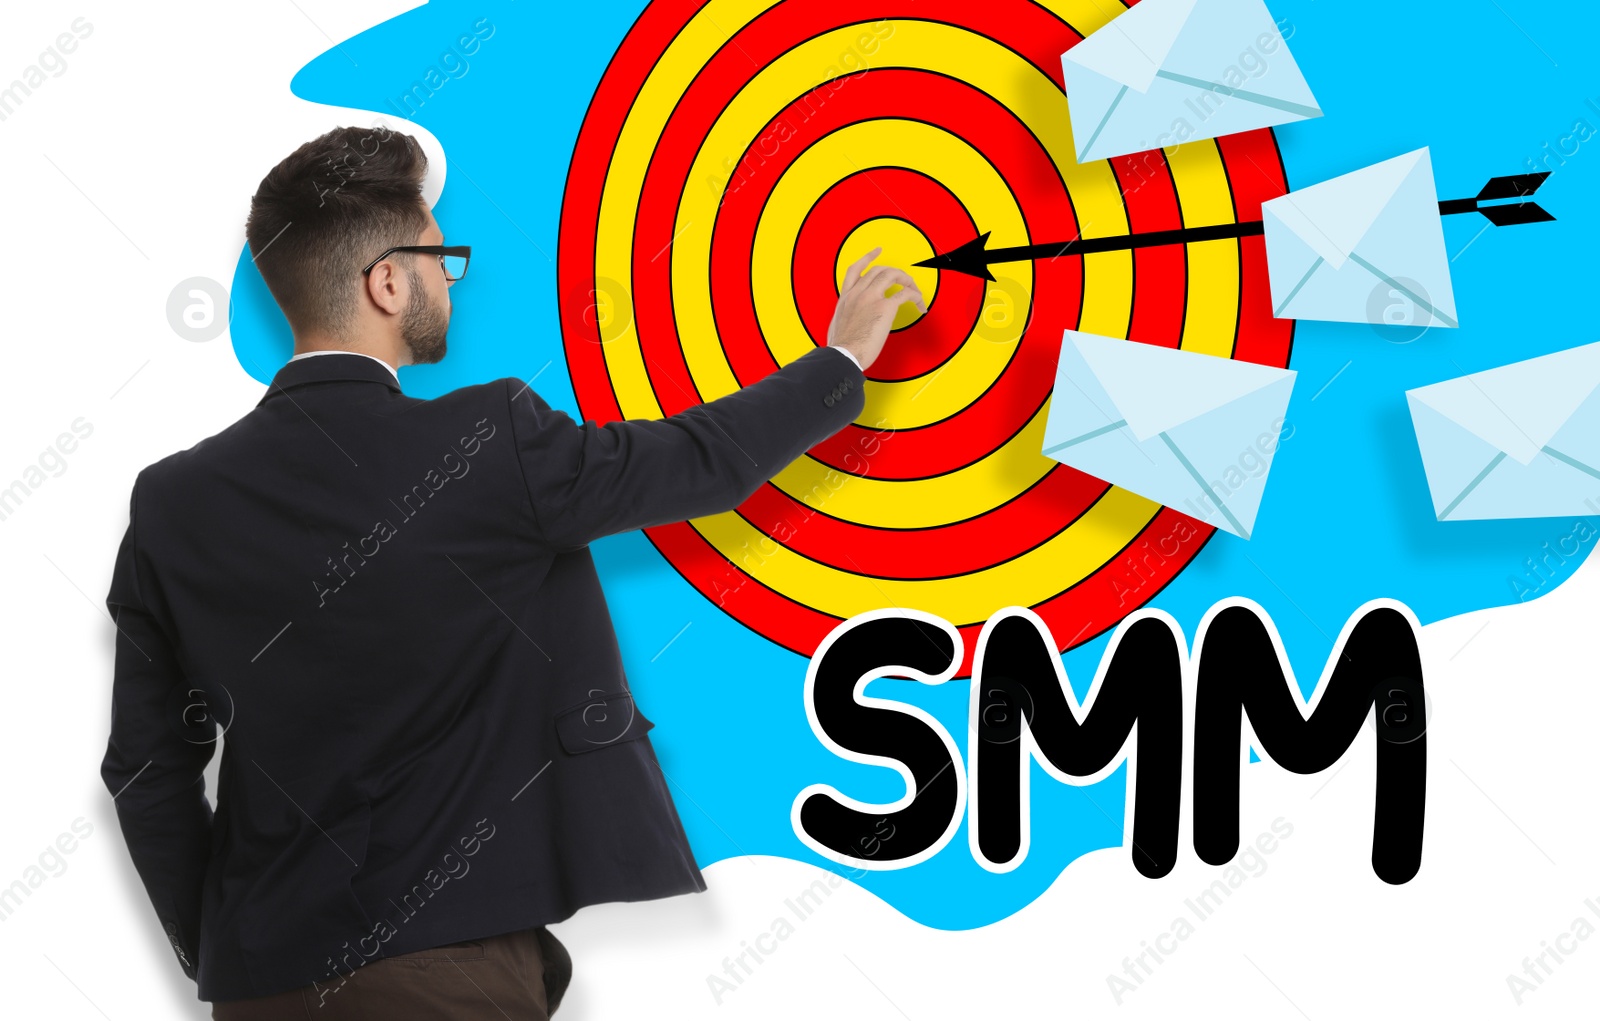 Image of Social media marketing. Man in business attire, abbreviation SMM, dart board, arrow and letters illustrations on white background